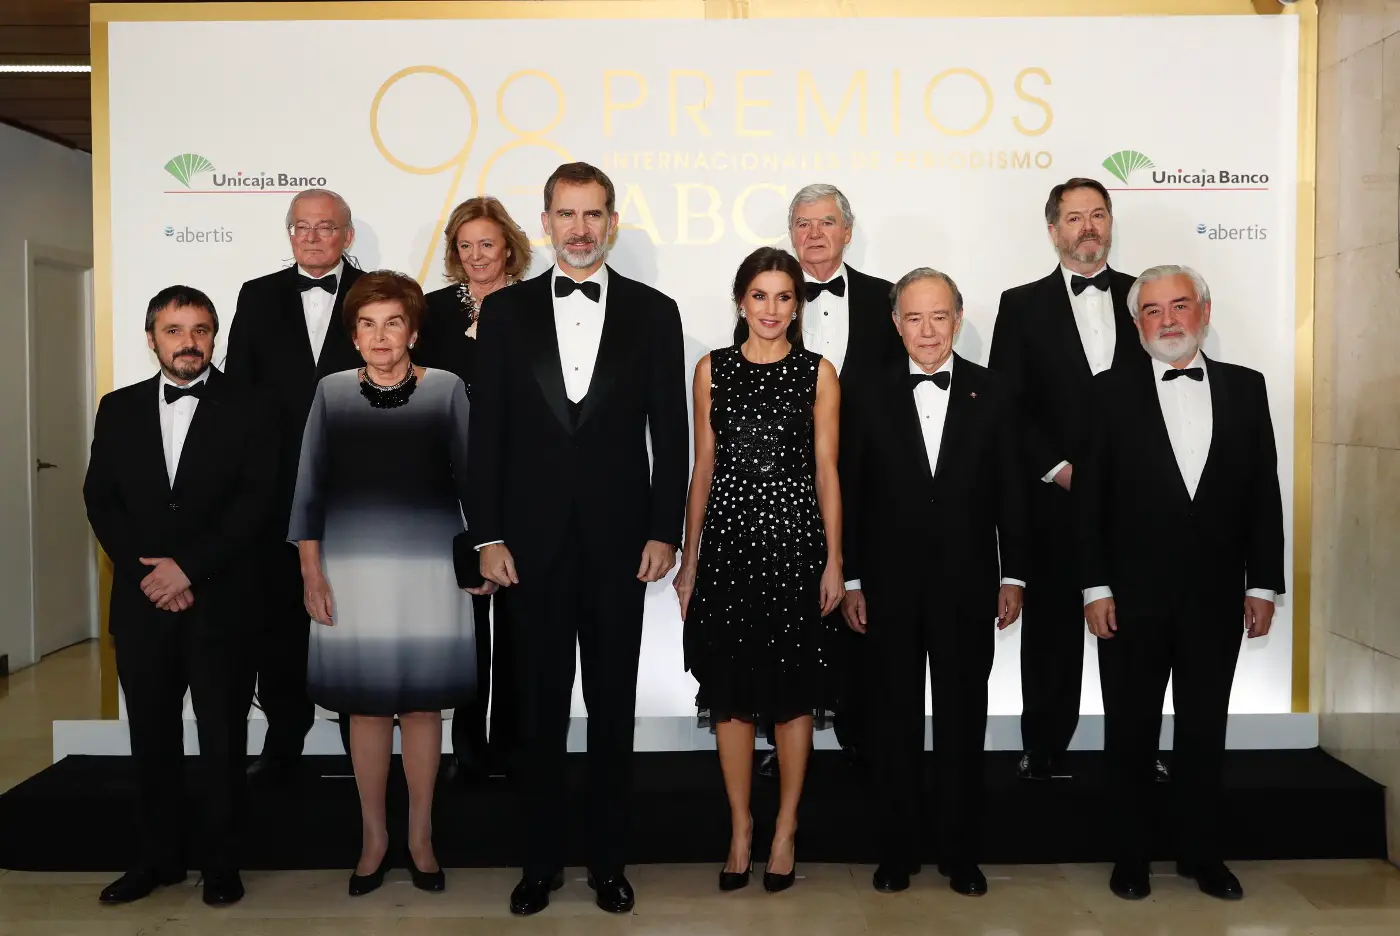 King Felipe and Queen Letizia at the dinner with the winners of Mariano de Cavia